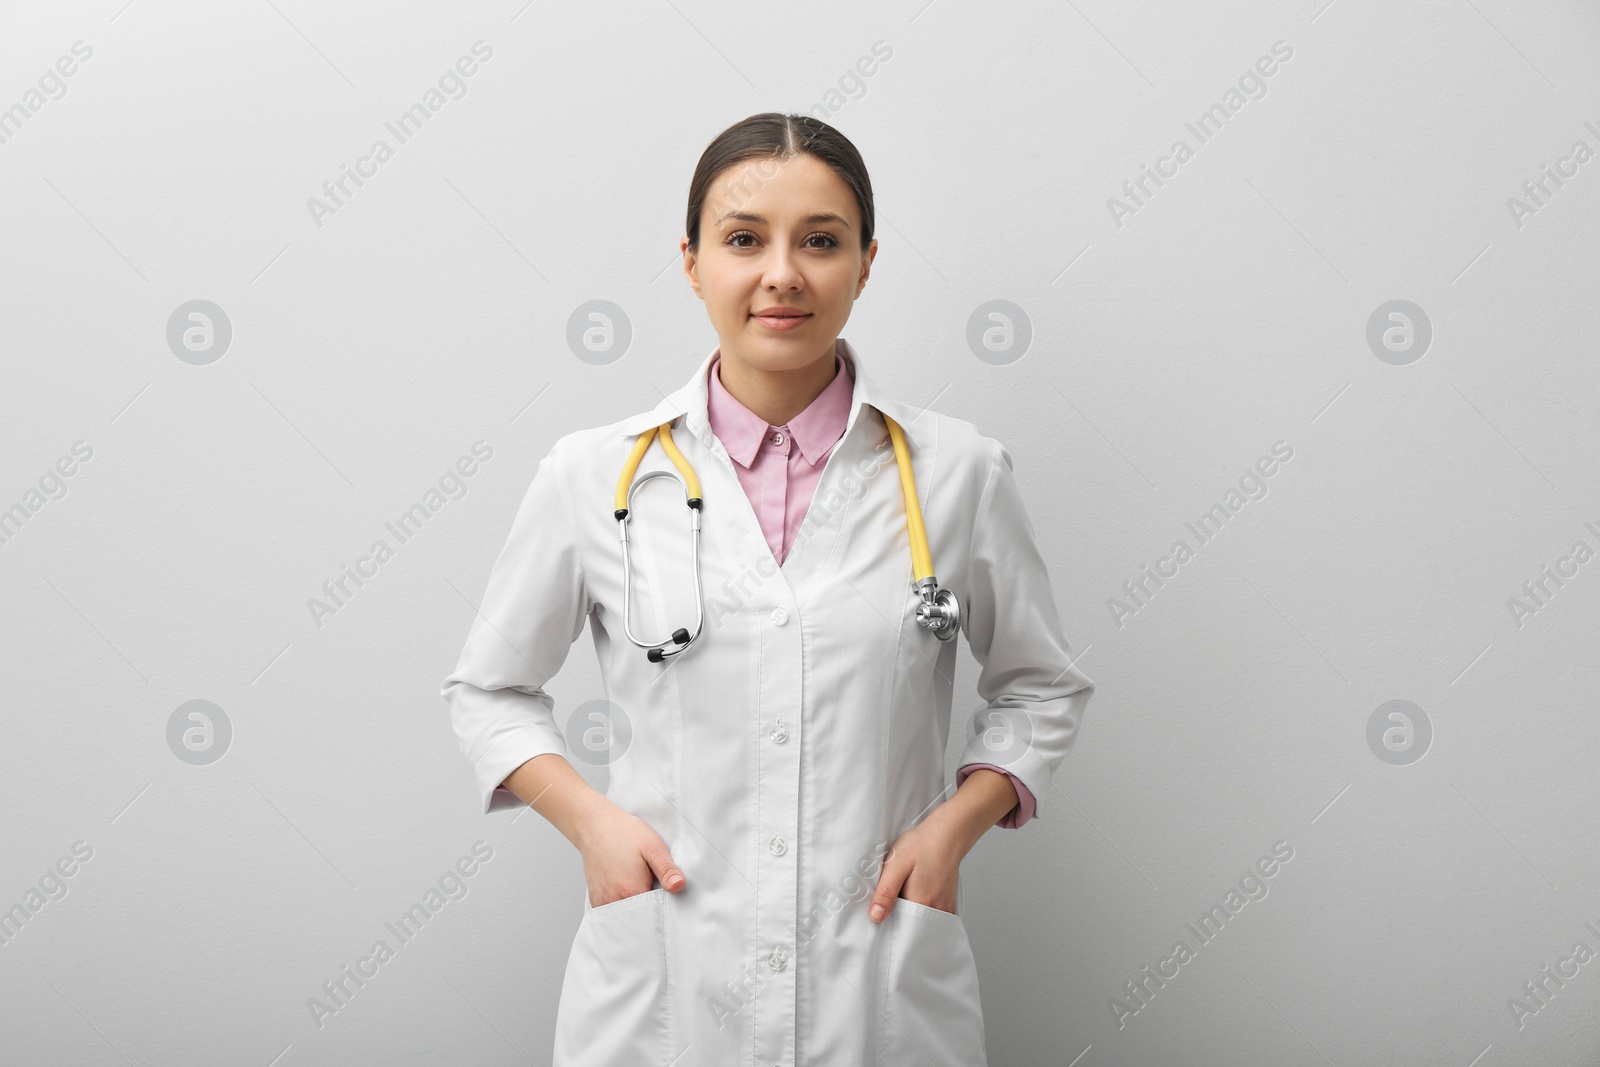 Photo of Pediatrician in uniform with stethoscope on light grey background